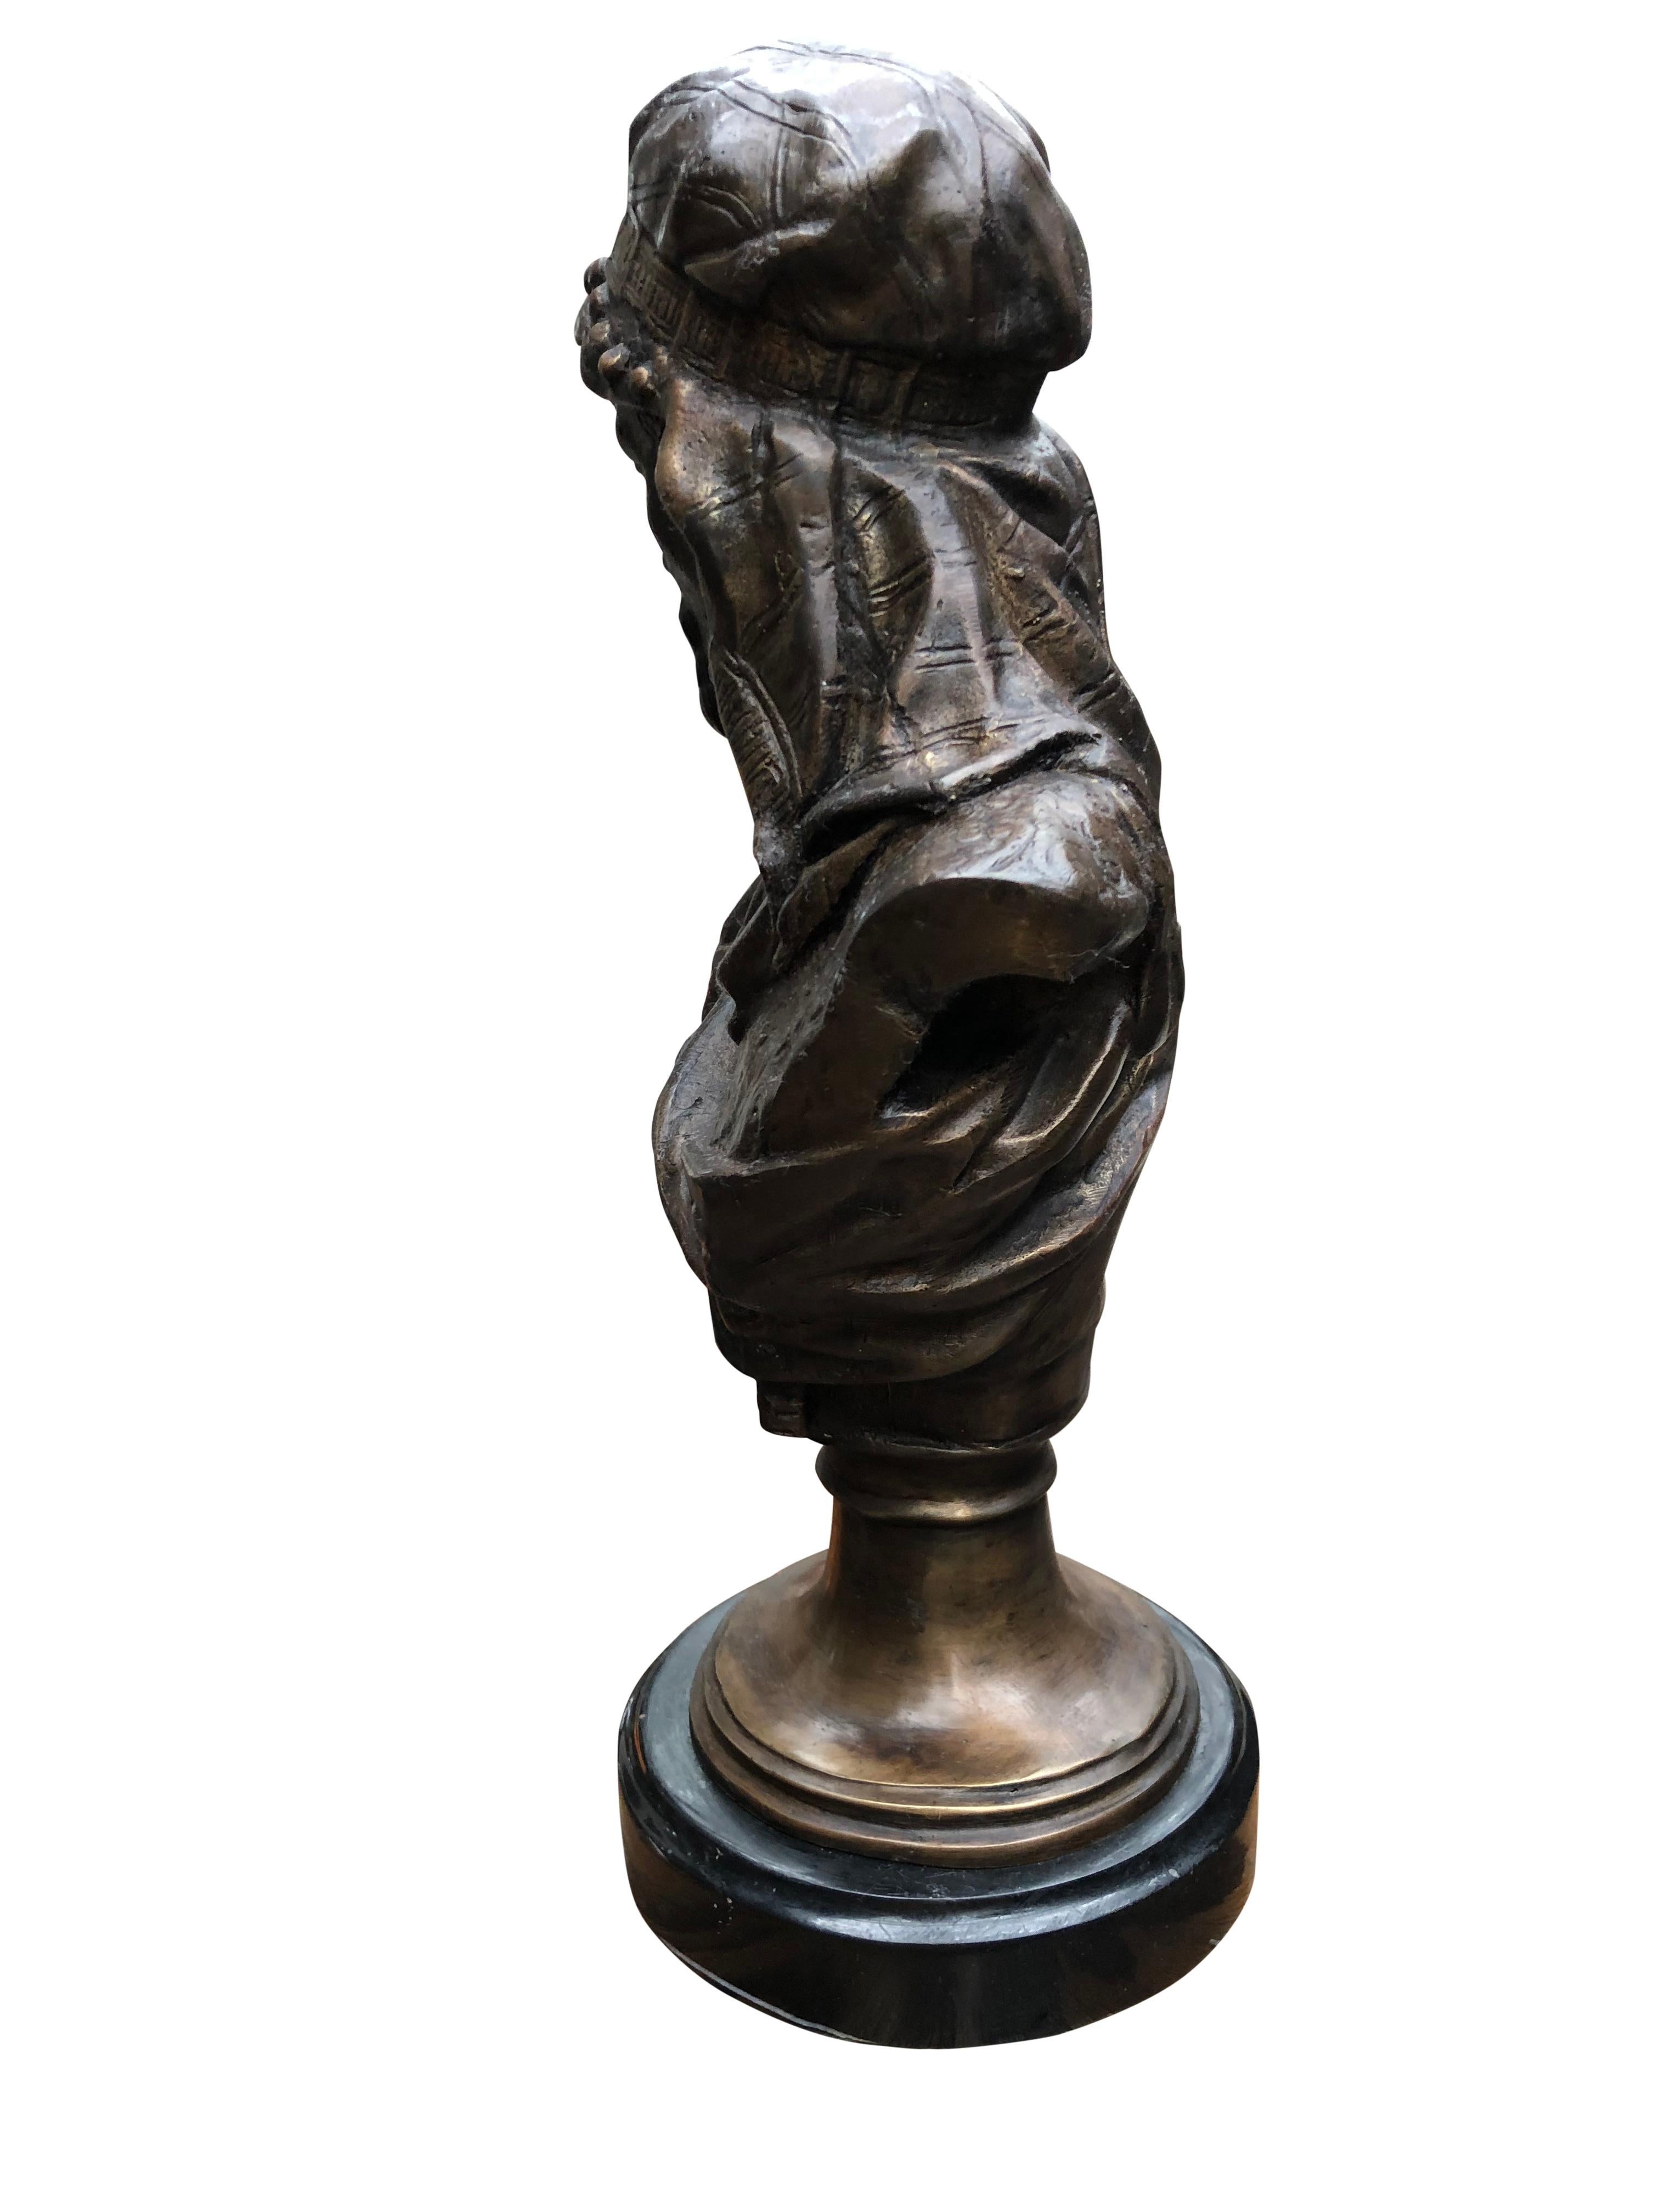 A superb Arab man bronze sculpture, 20th century. Incredible detail of the bronze with a stunning patina finish. Stands on a round marble base. Offered in excellent condition.